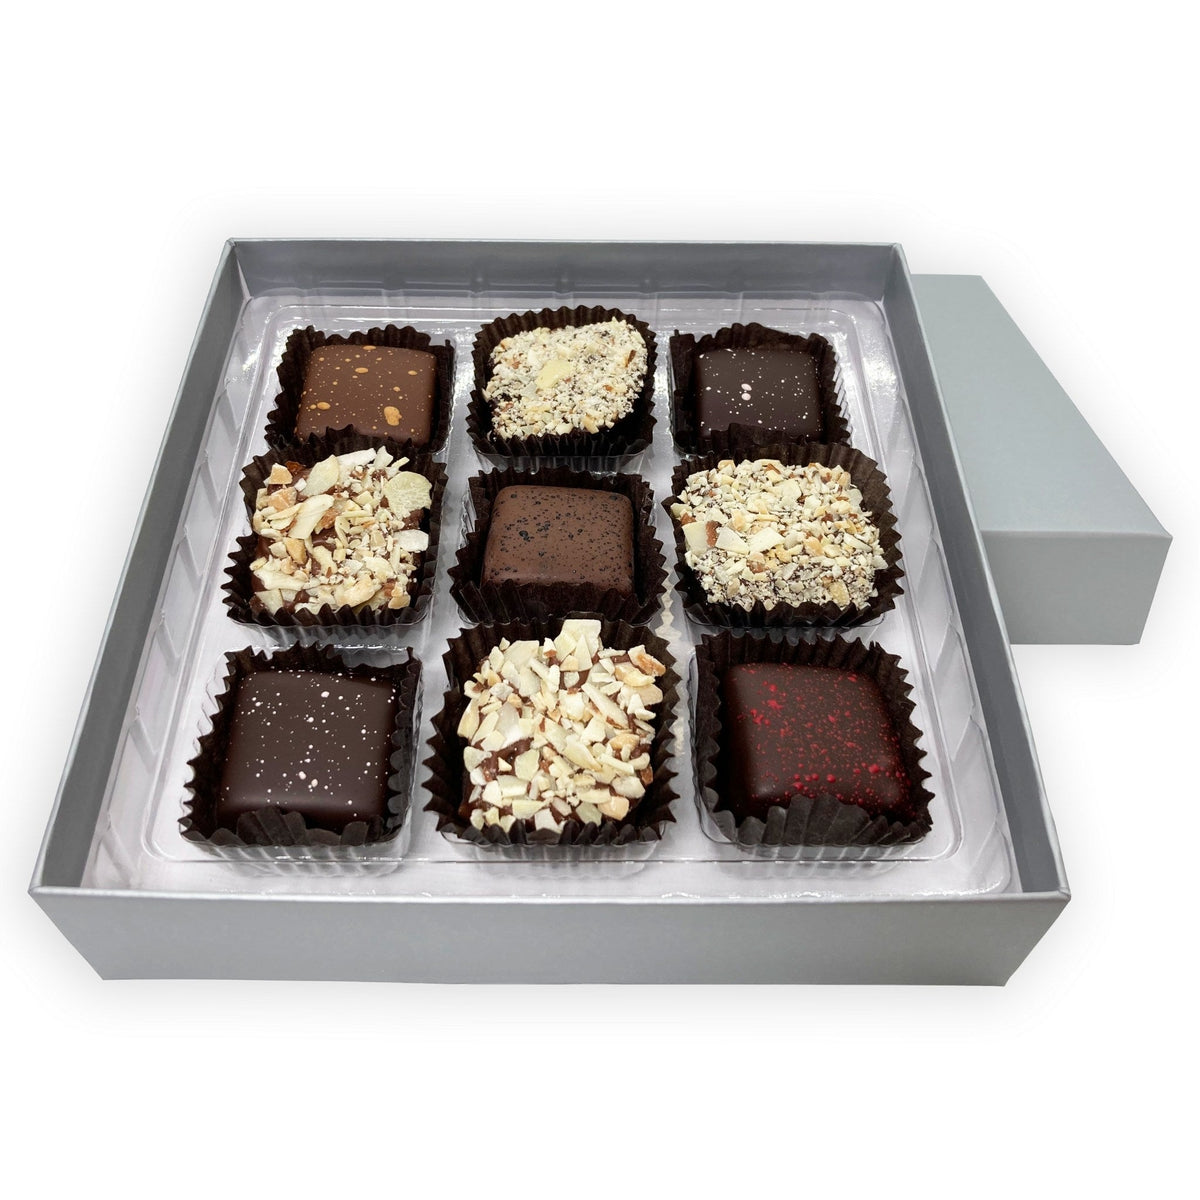 Dilettante Chocolates Caramel Toffee Collection Featuring Salted Caramels and Rheingold Butter Toffee